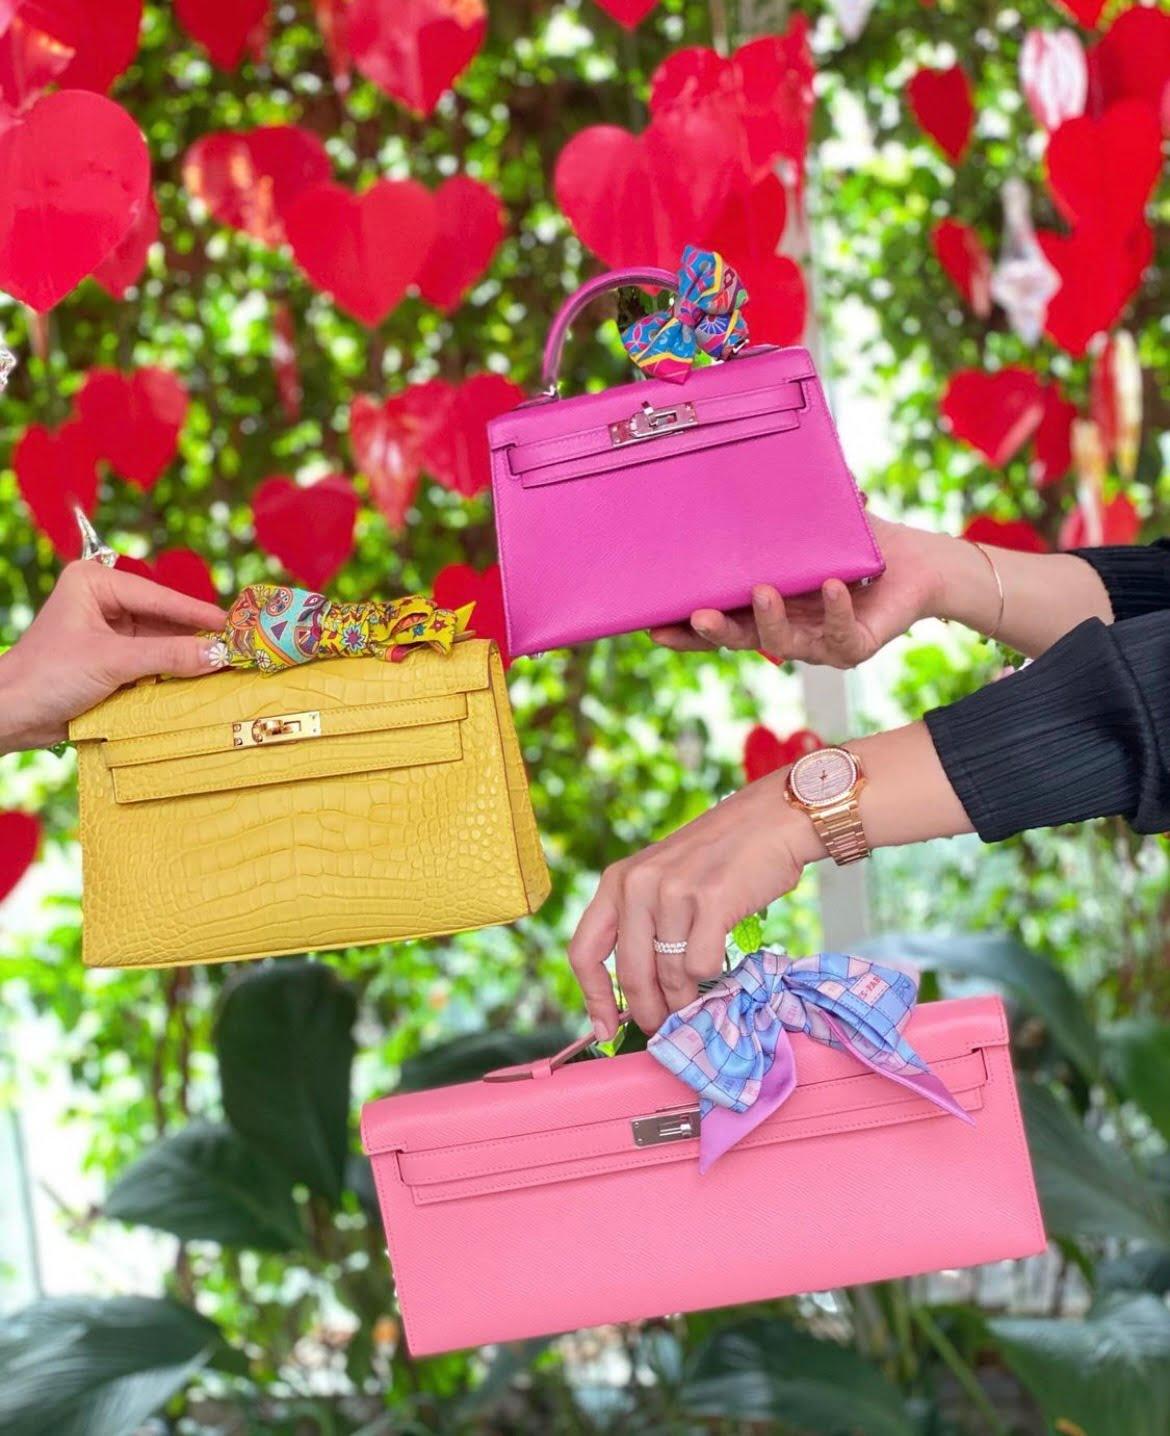 The Complete Guide to the Hermès Birkin Faubourg